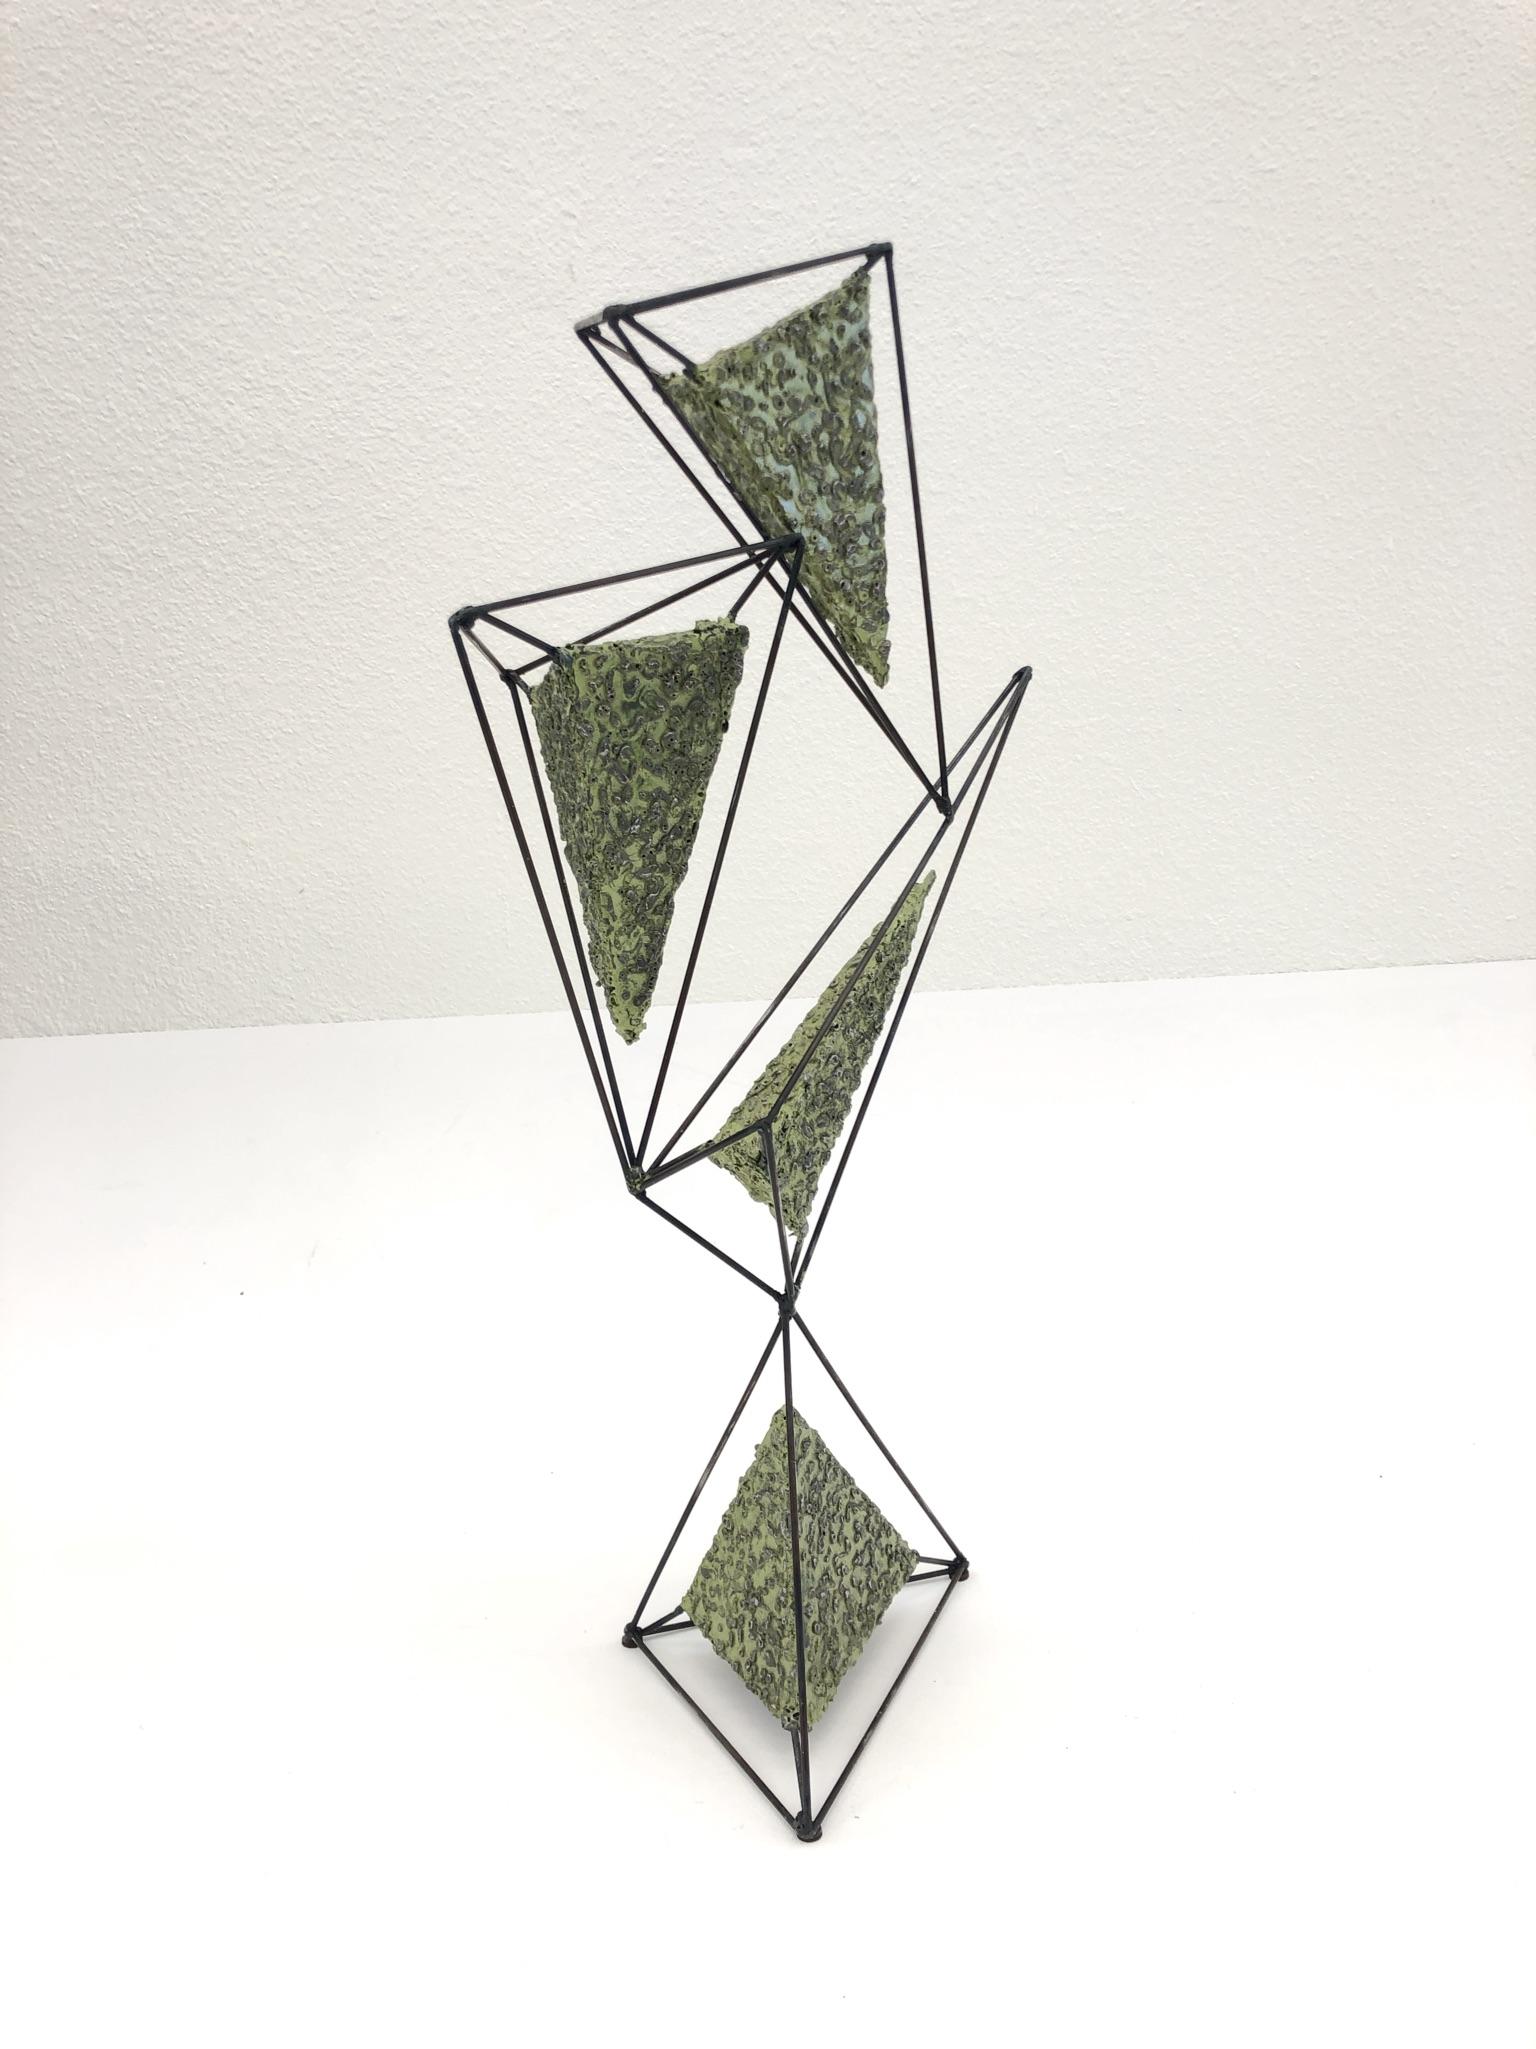 A spectacular geometric Brutalist studio sculpture by American sculptor John De La Rosa. The sculpture is constructed of steel and painted with a light olive green lacquer. 
Dimension: 25” high, 12”wide, 7” deep.